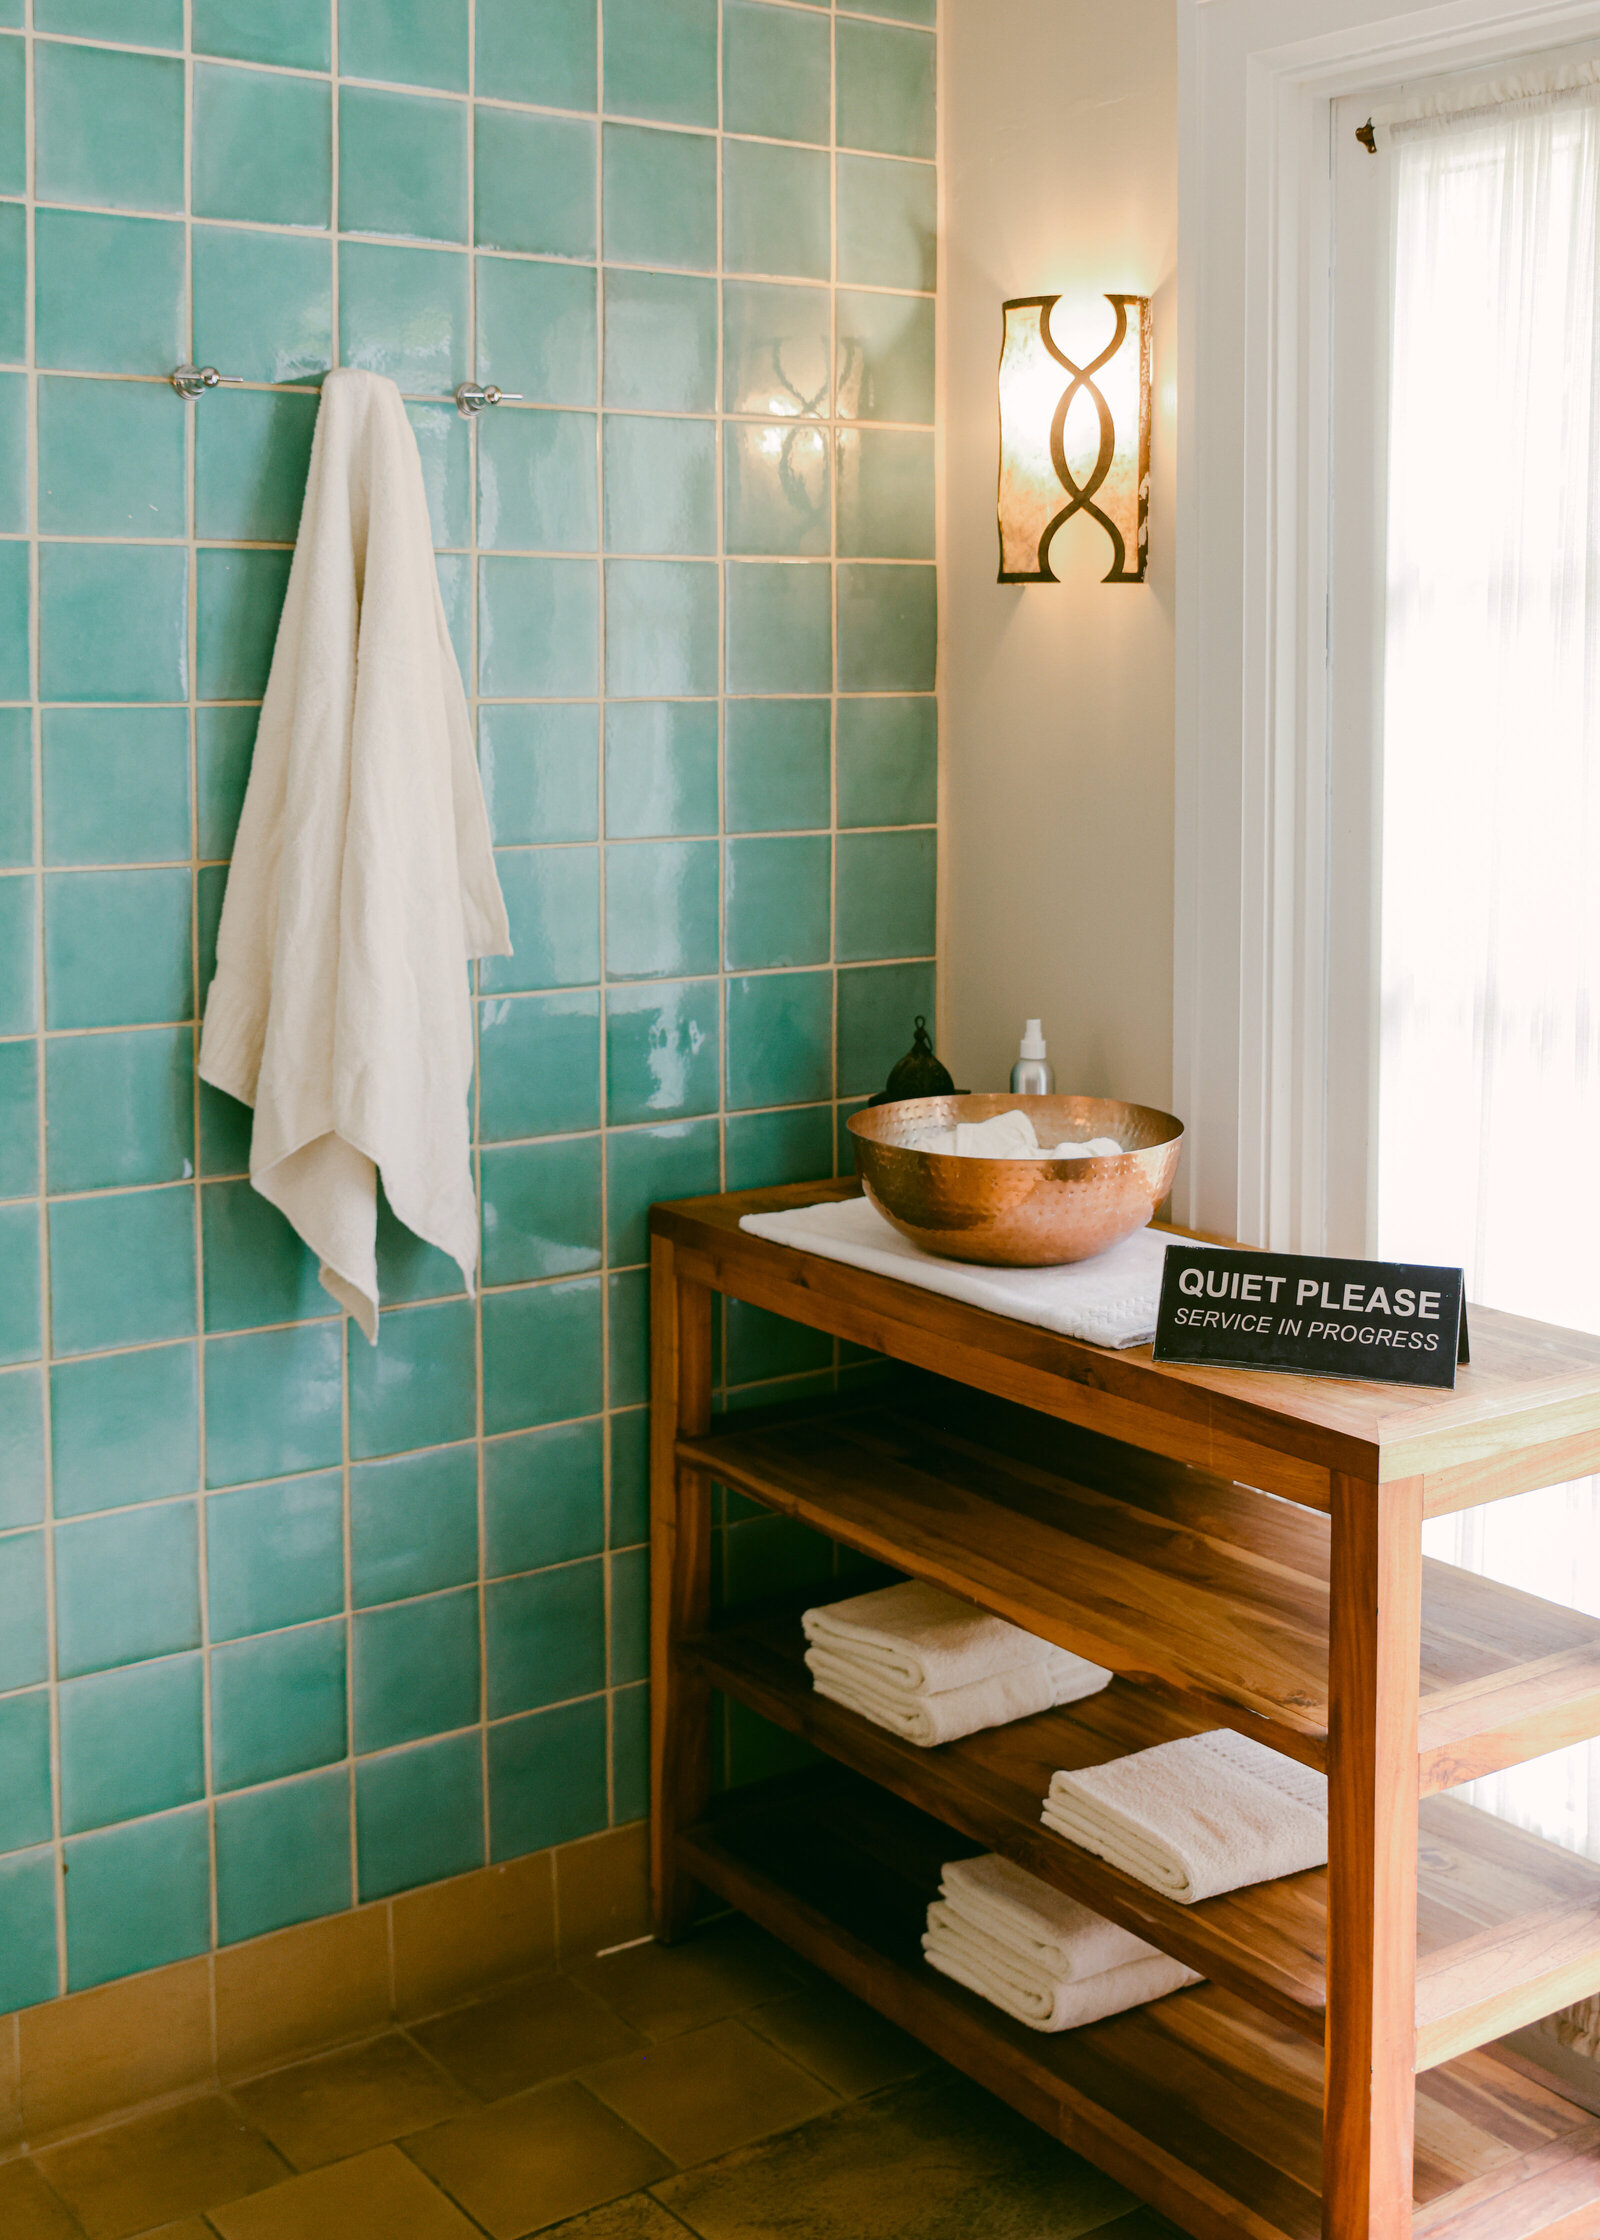 Turquoise Zellige Tile in Spa by hotel interior design photographer Chelsea Loren